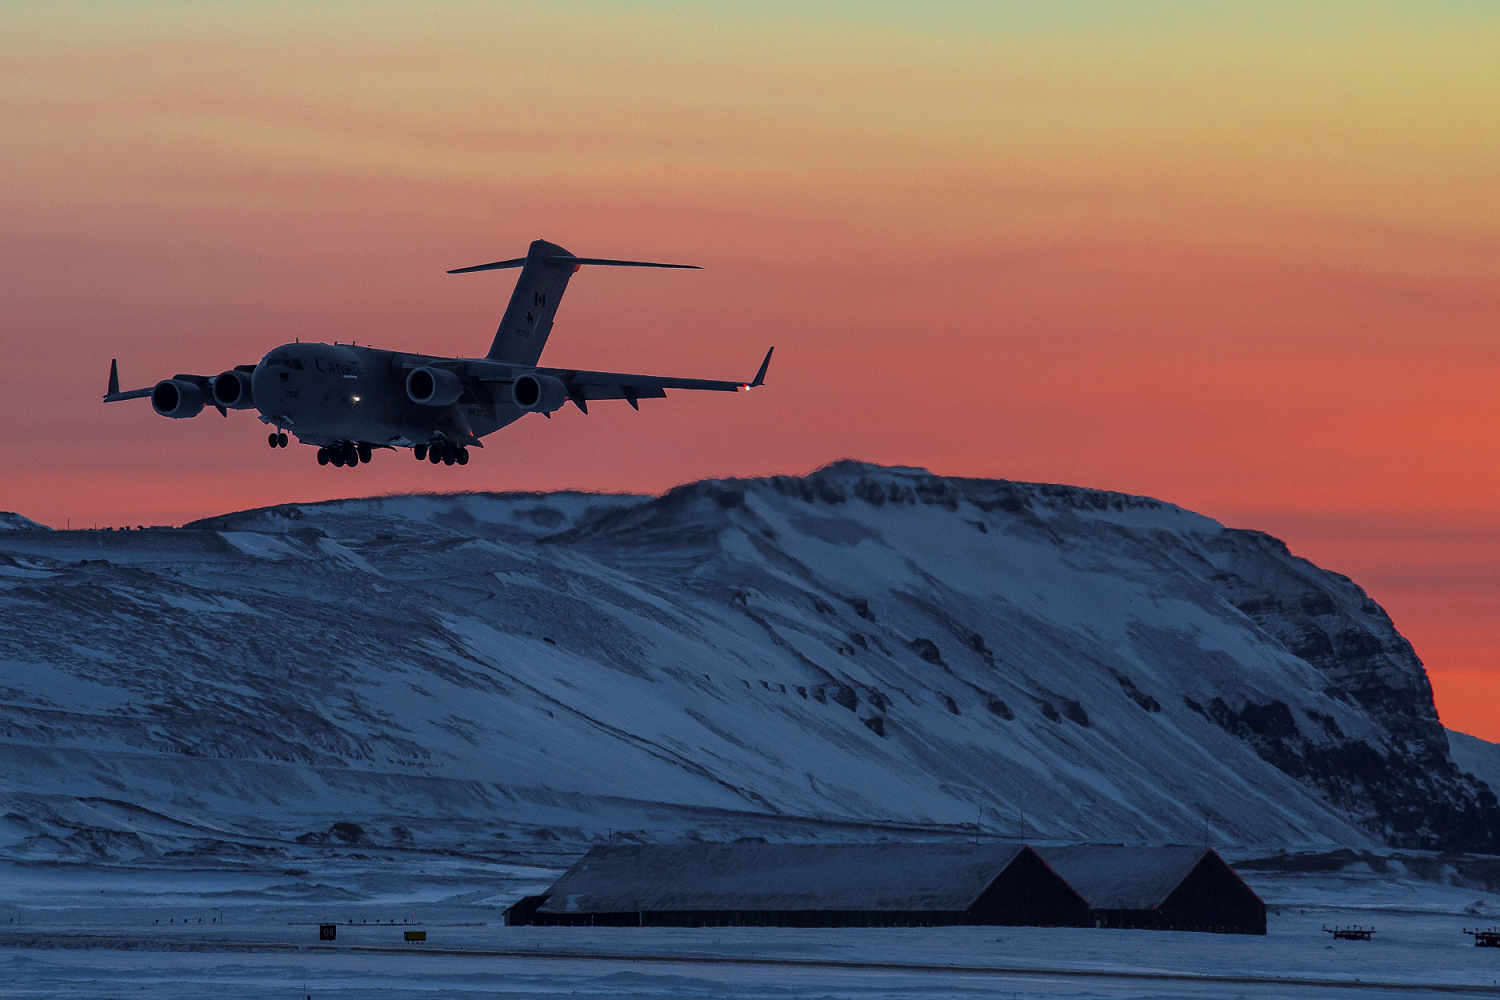 September 30, 2016. A CC-177 Globemaster aircraft prepares to land at Thule Air Base, Greenland after dropping off equipment at Canadian Forces Base Alert during Operation BOXTOP on September 30, 2016. (Photo: Cpl Ryan Moulton, 8 Wing Imaging)